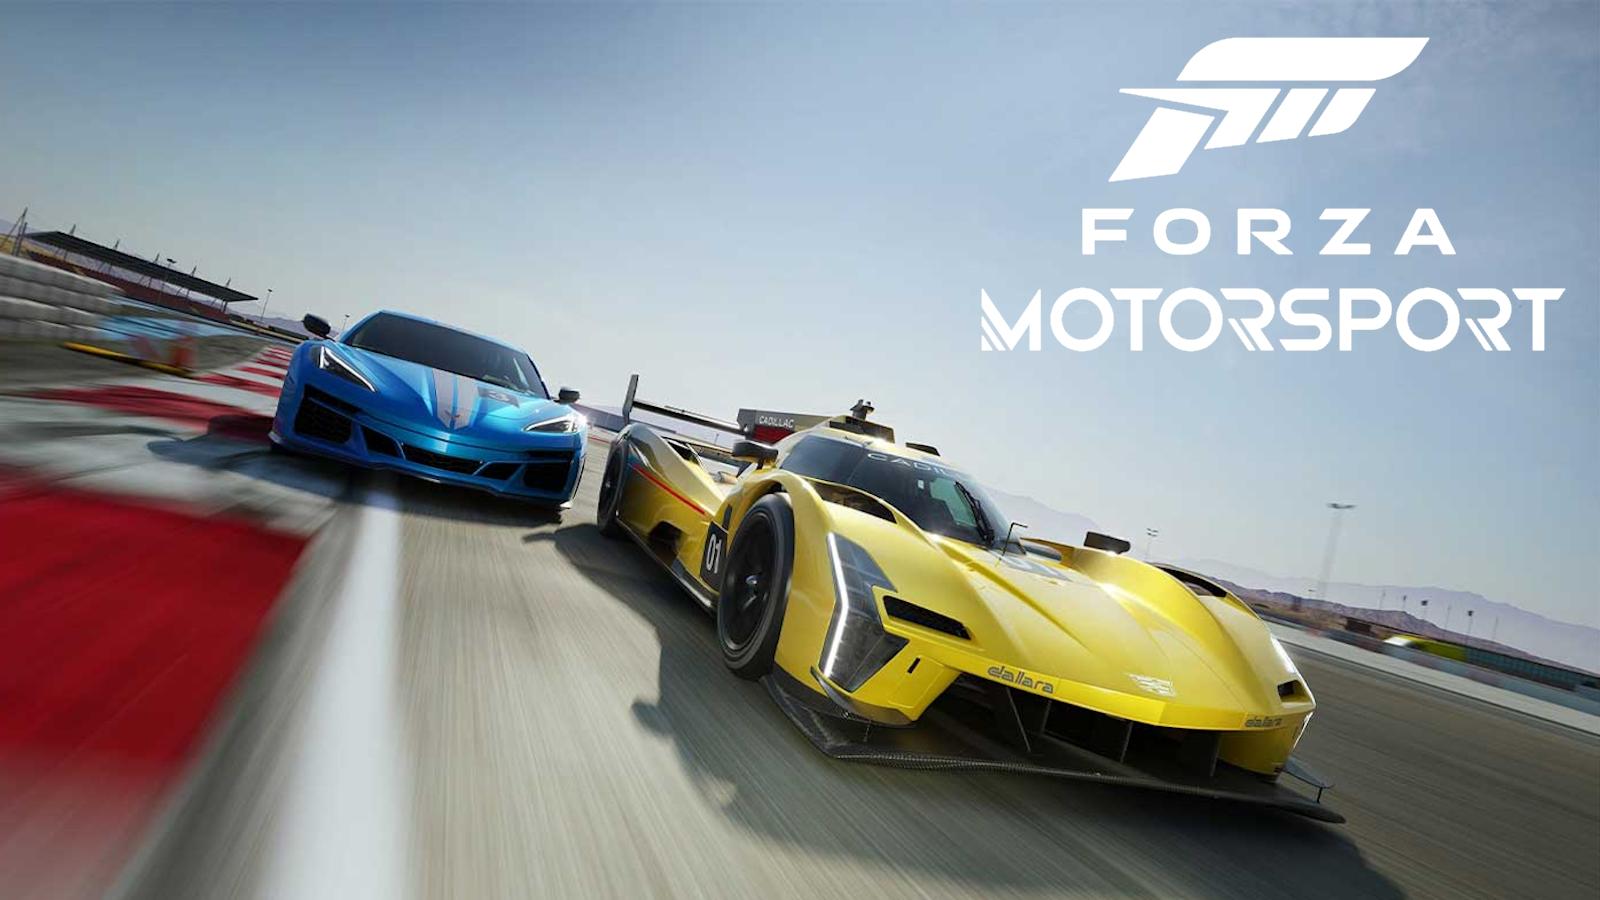 Is Forza Motorsport 8 Multiplayer? About Forza Motorsport